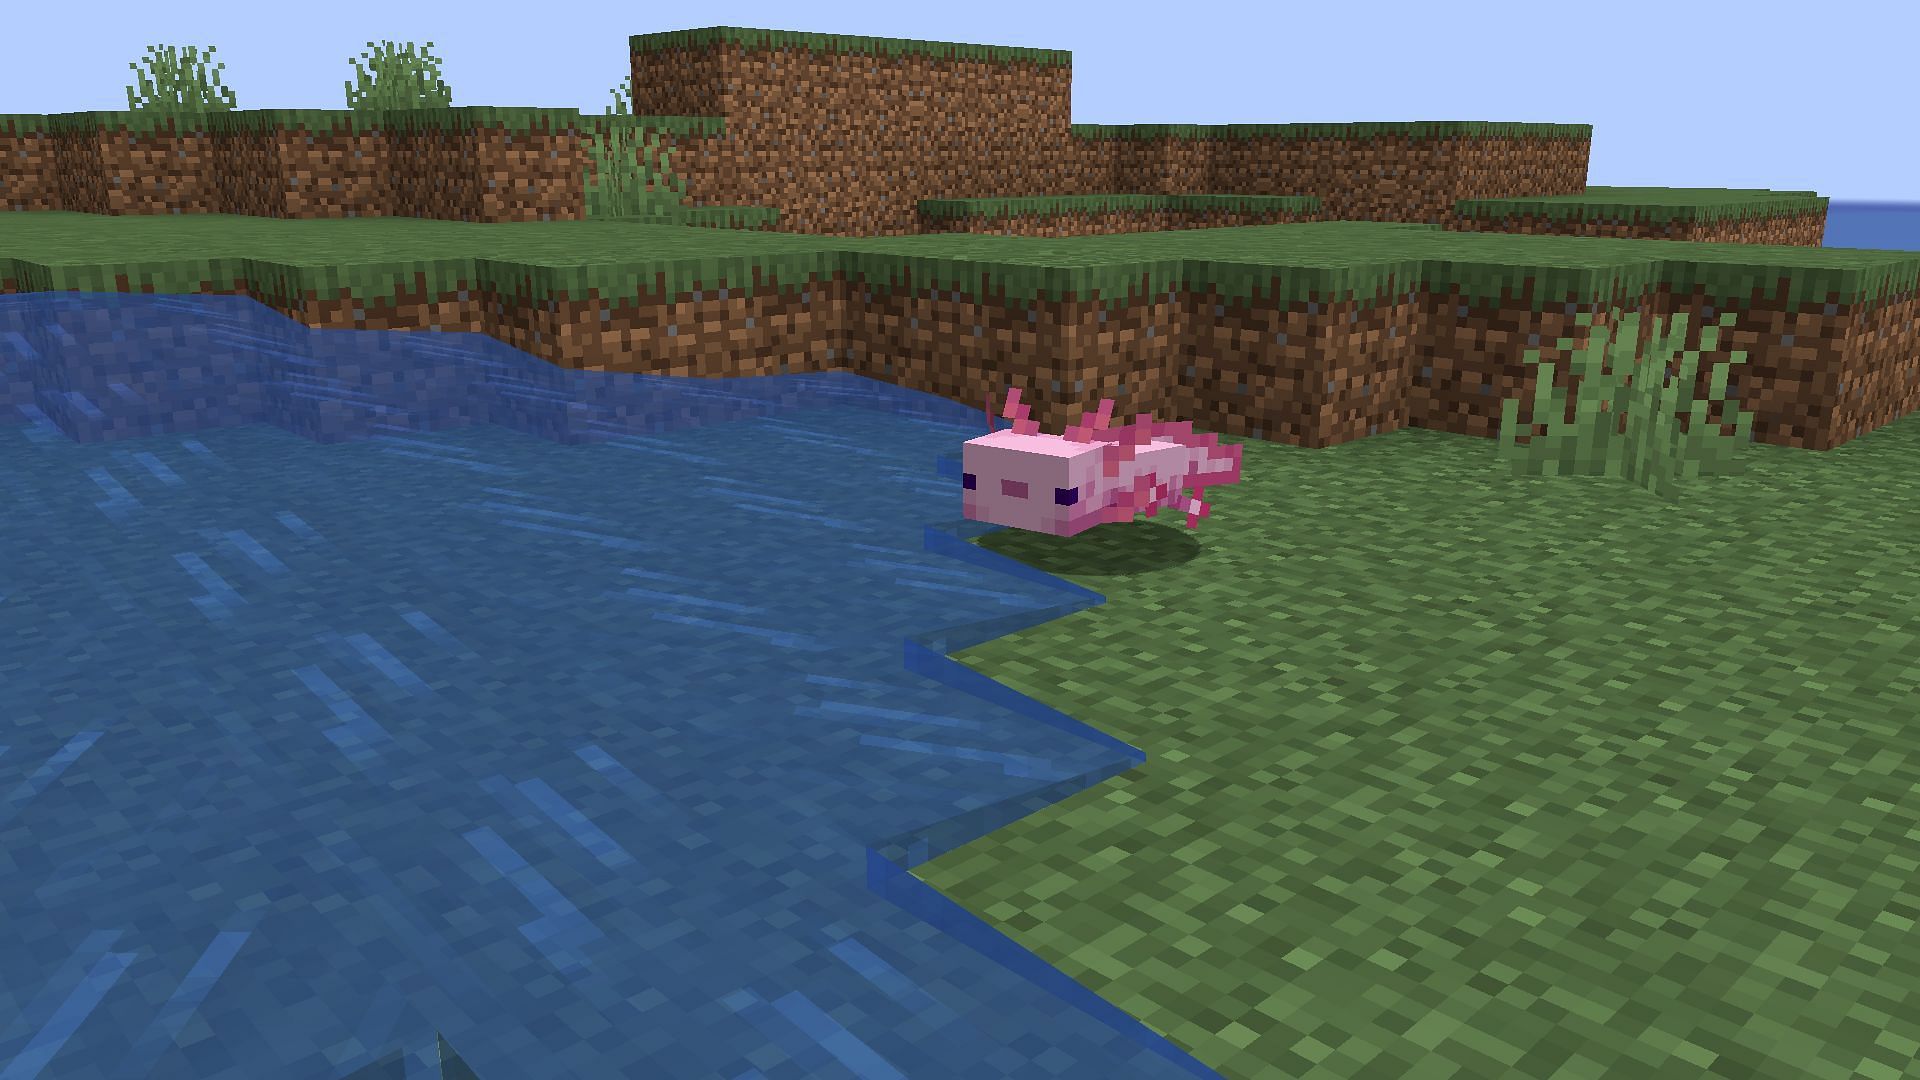 Axolotls are interesting creatures that can live both in water and on land in Minecraft (Image via Mojang)